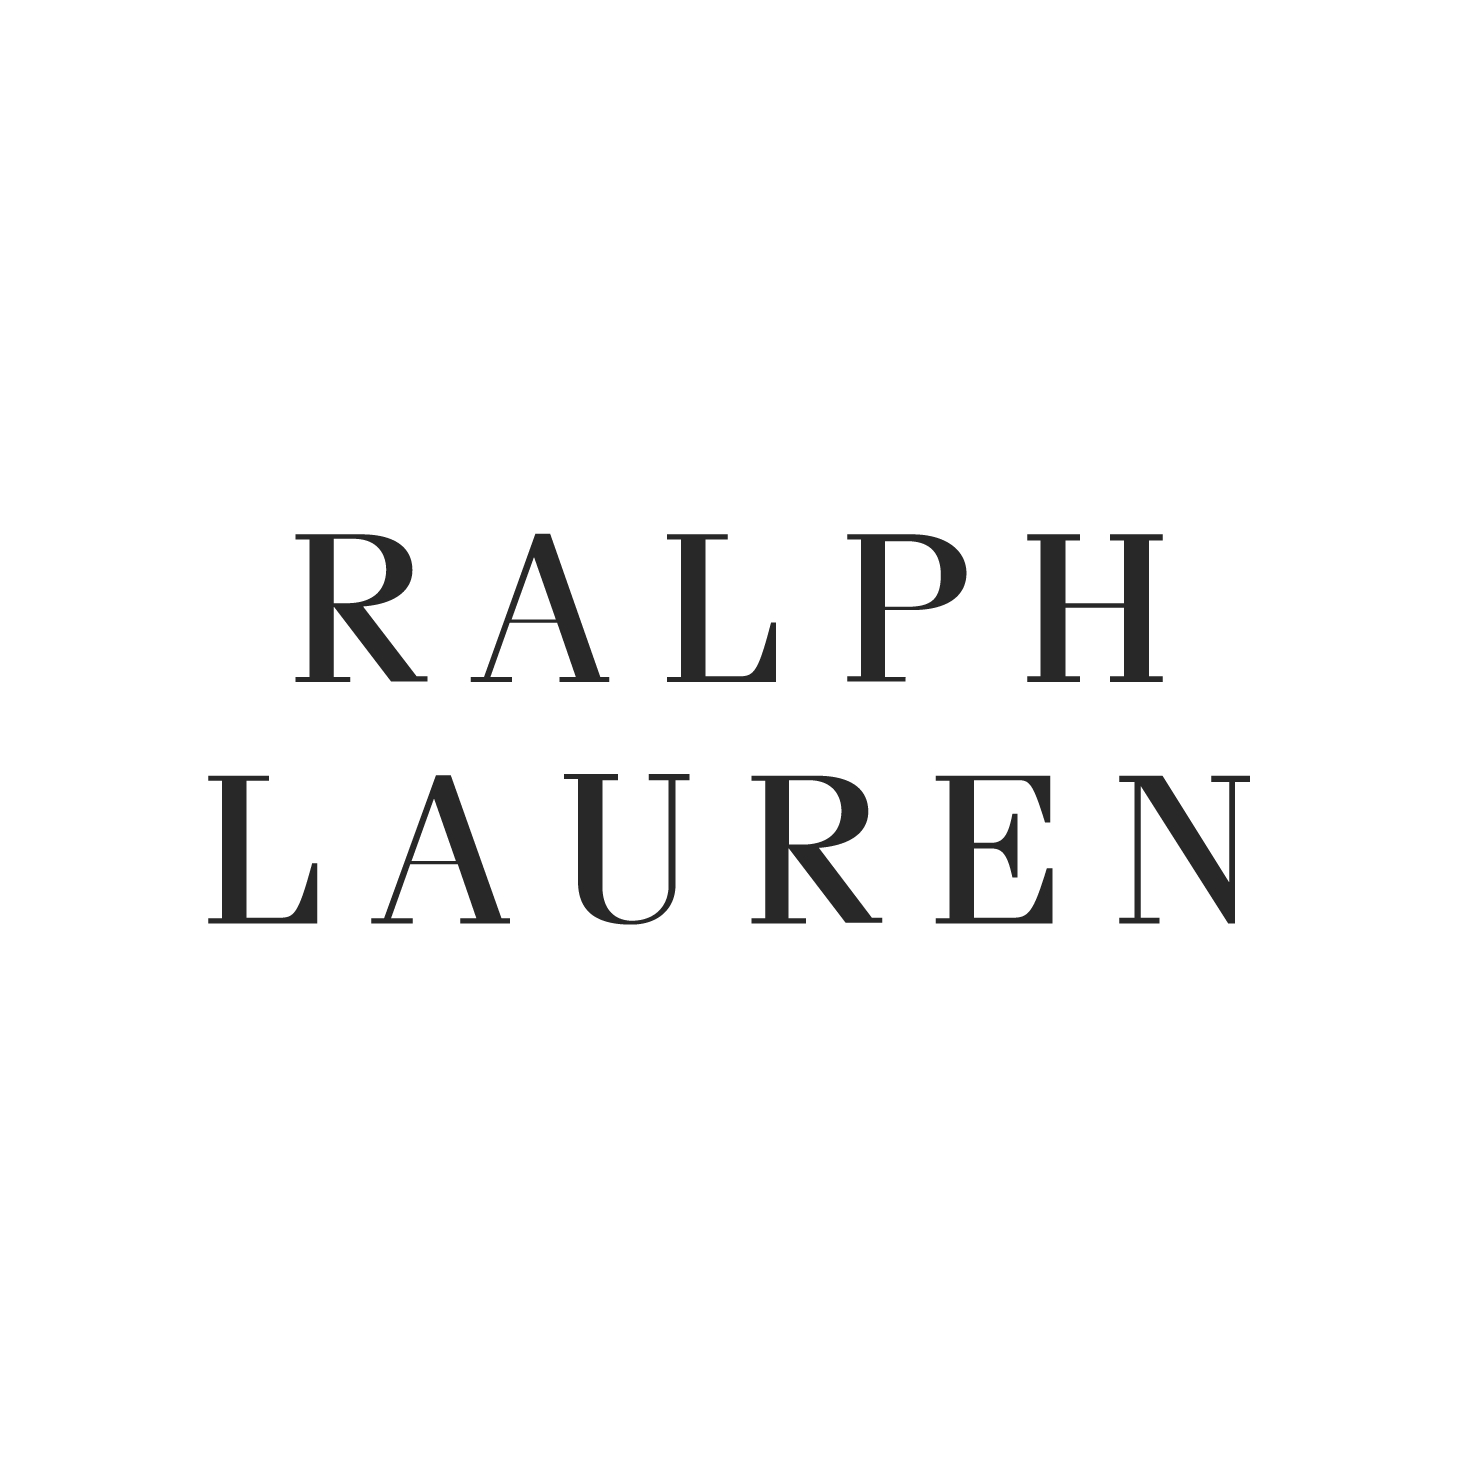 Sign Up for the Ralph Lauren Affiliate Program with Sovrn Commerce ...